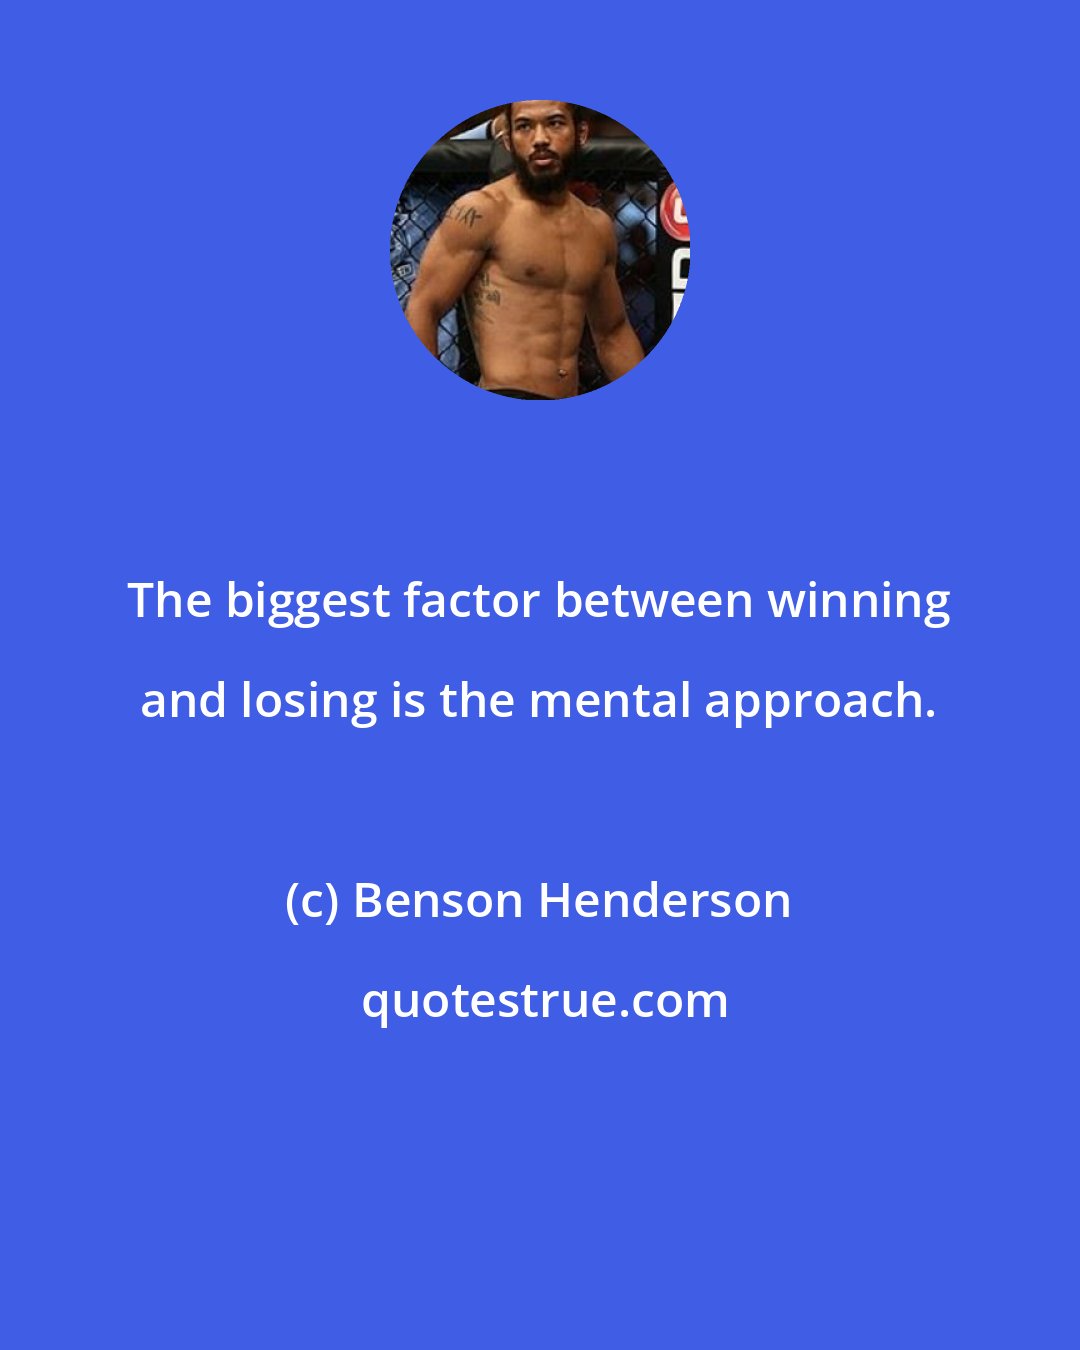 Benson Henderson: The biggest factor between winning and losing is the mental approach.